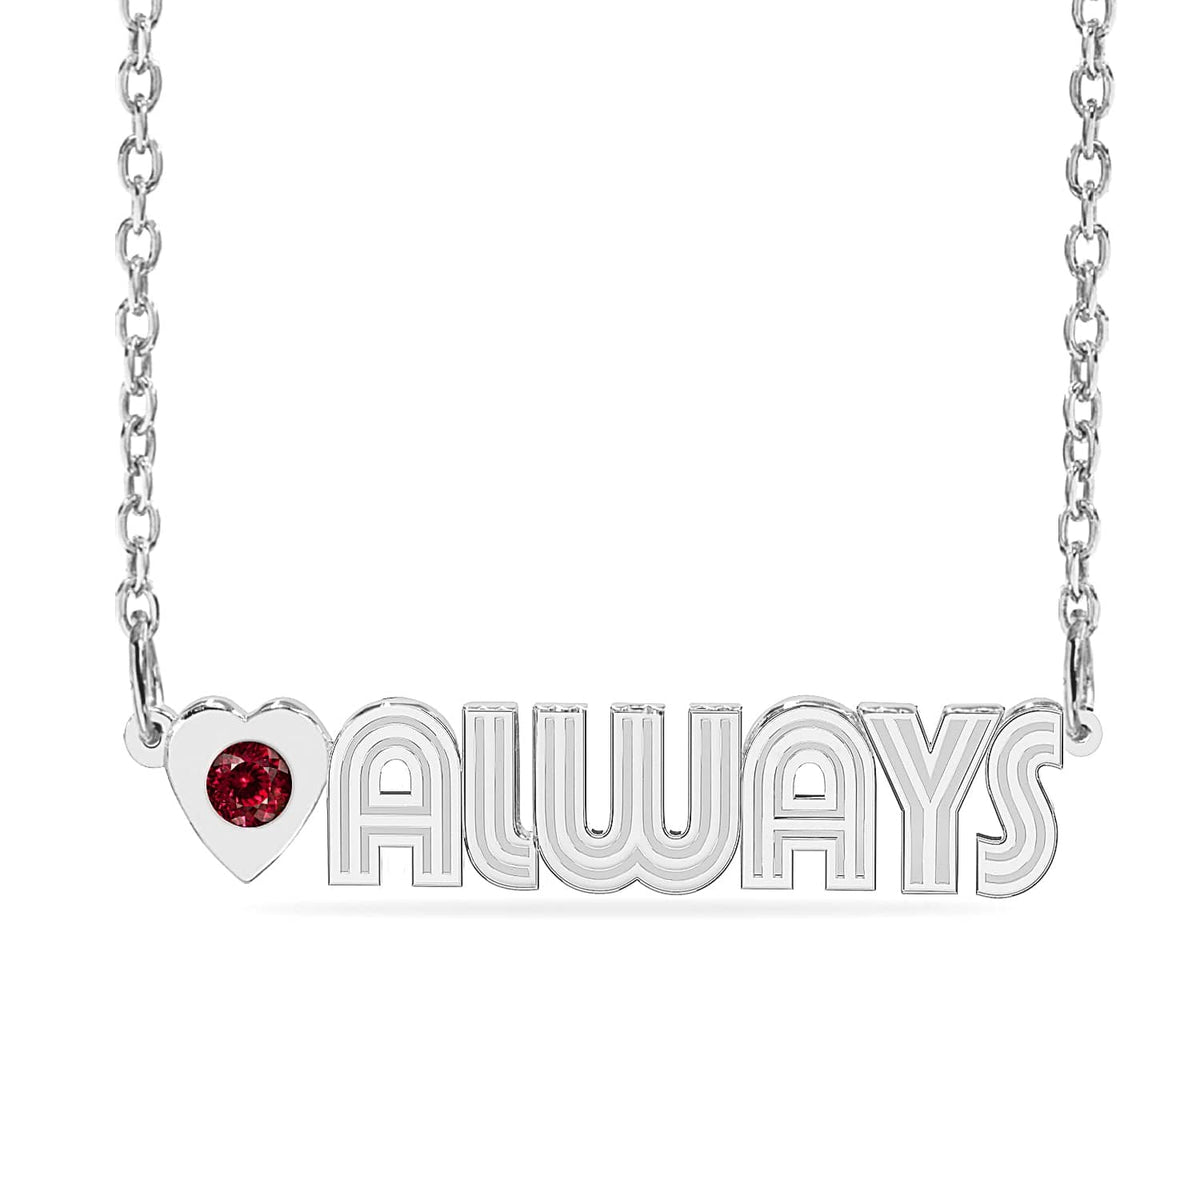 Sterling Silver / Link Chain Personalized Name necklace with Birthstone on Heart